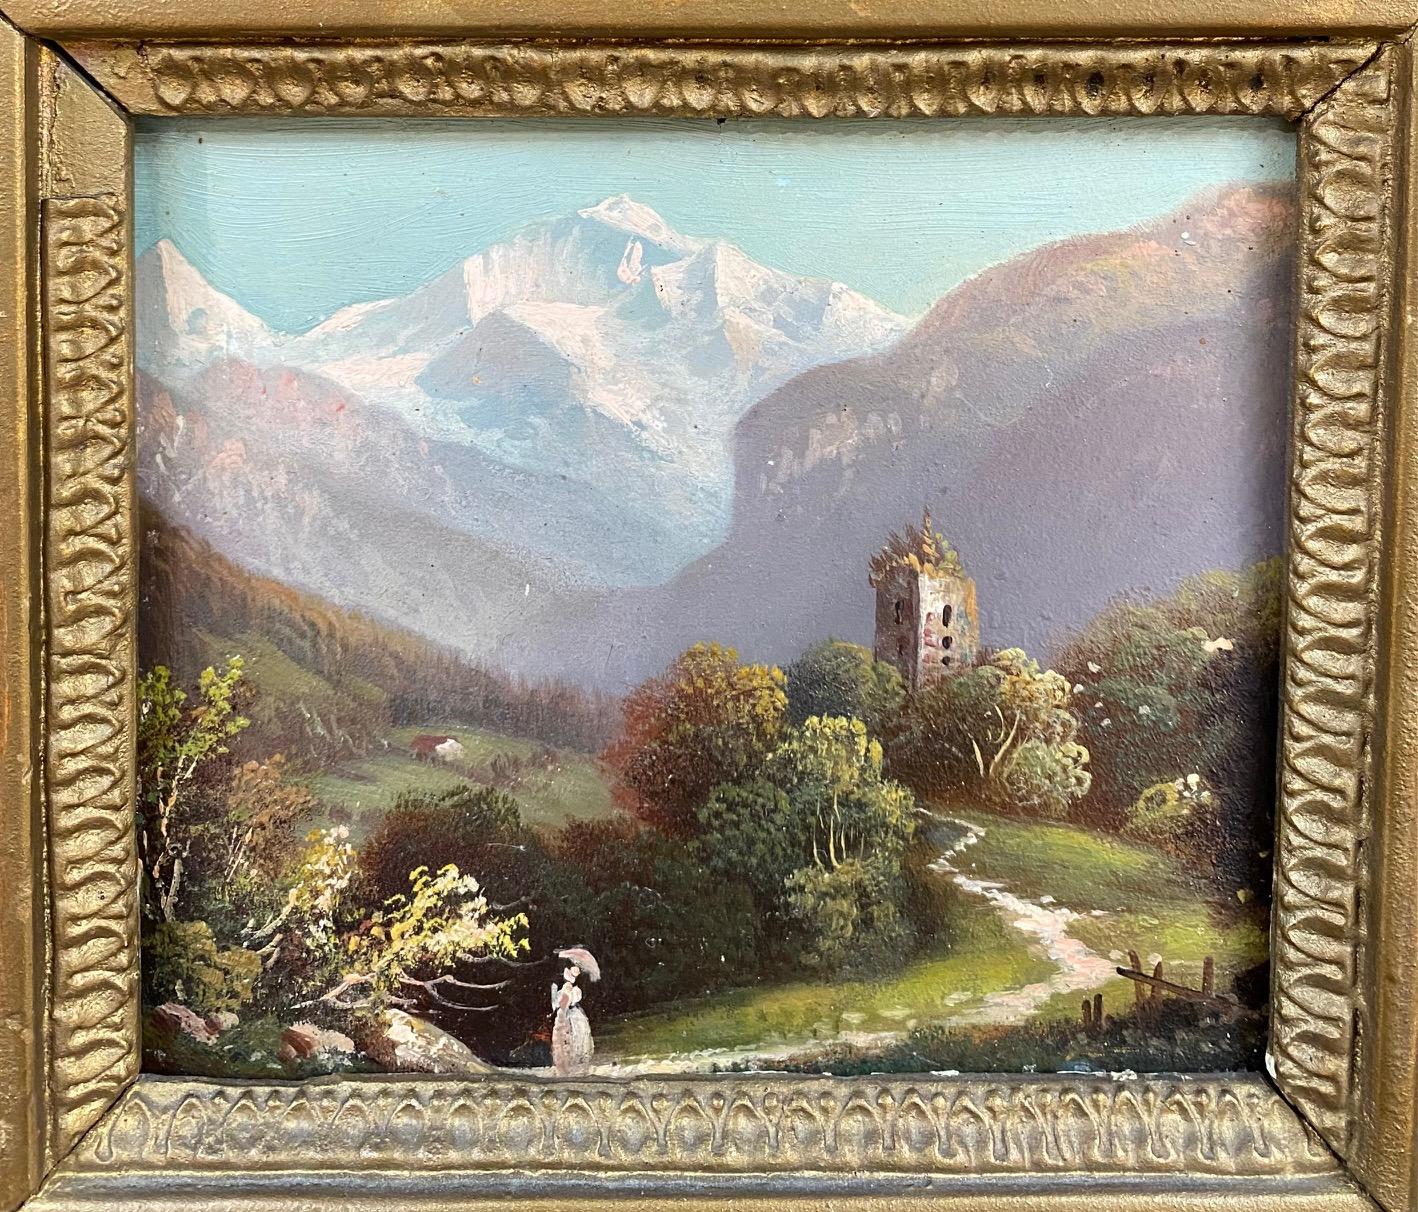 Unknown Landscape Painting - The ruines Undspunnen and the Jungfrau - Oil on cardboard 19th century 